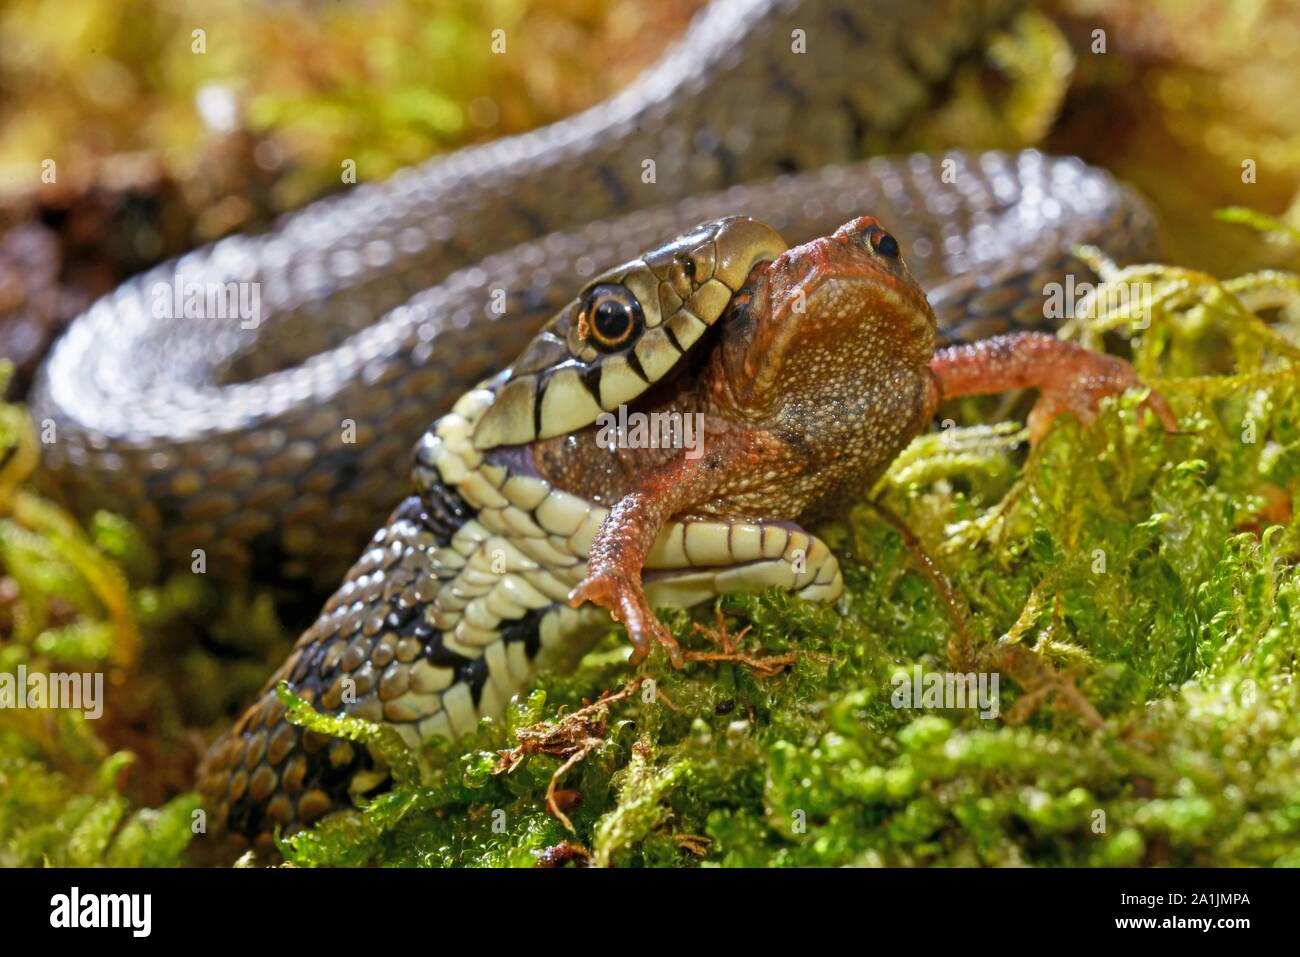 Barred grass snake (Natrix helvetica), eating a toad, Poitou, France Stock Photo